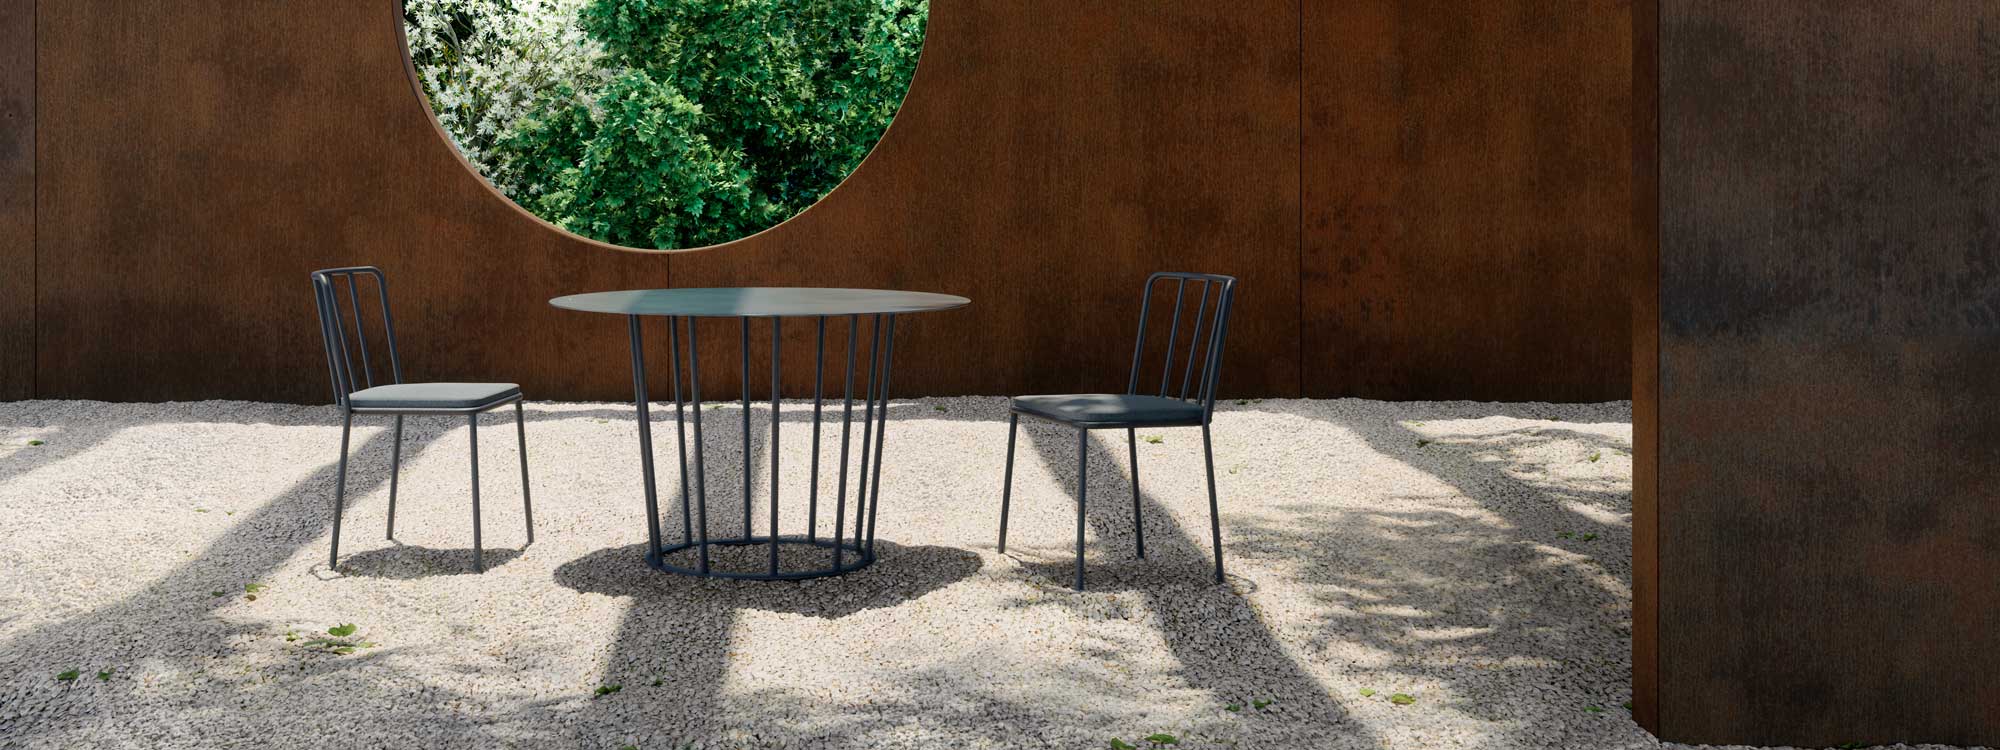 Image of Oiside Panama circular garden table & modern outdoor chairs, on gravel floor with oxidised corten steel structure in the background with round window looking out onto shrubs and trees